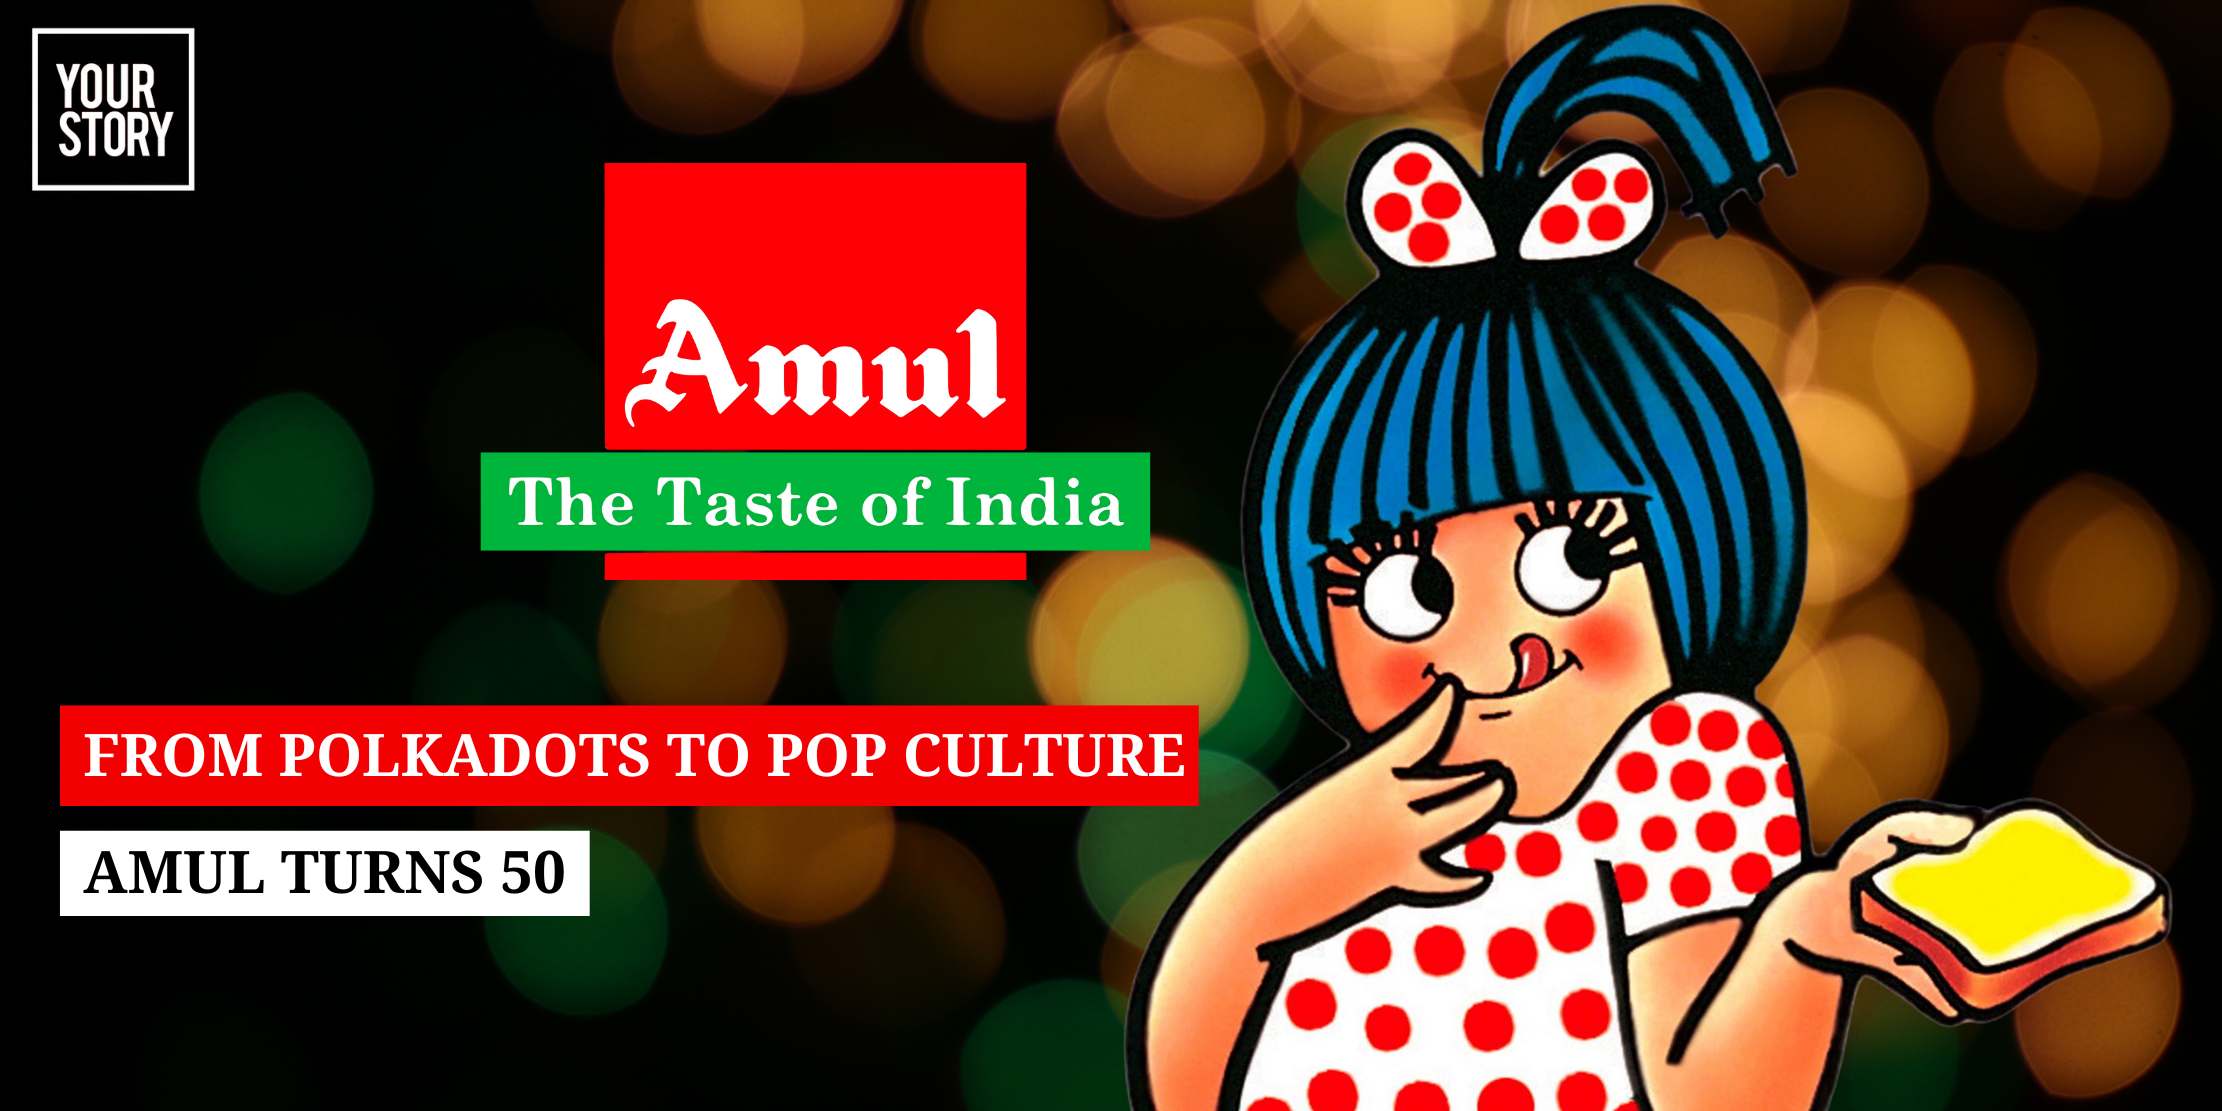 From Polkadots to Pop Culture: Amul turns 50